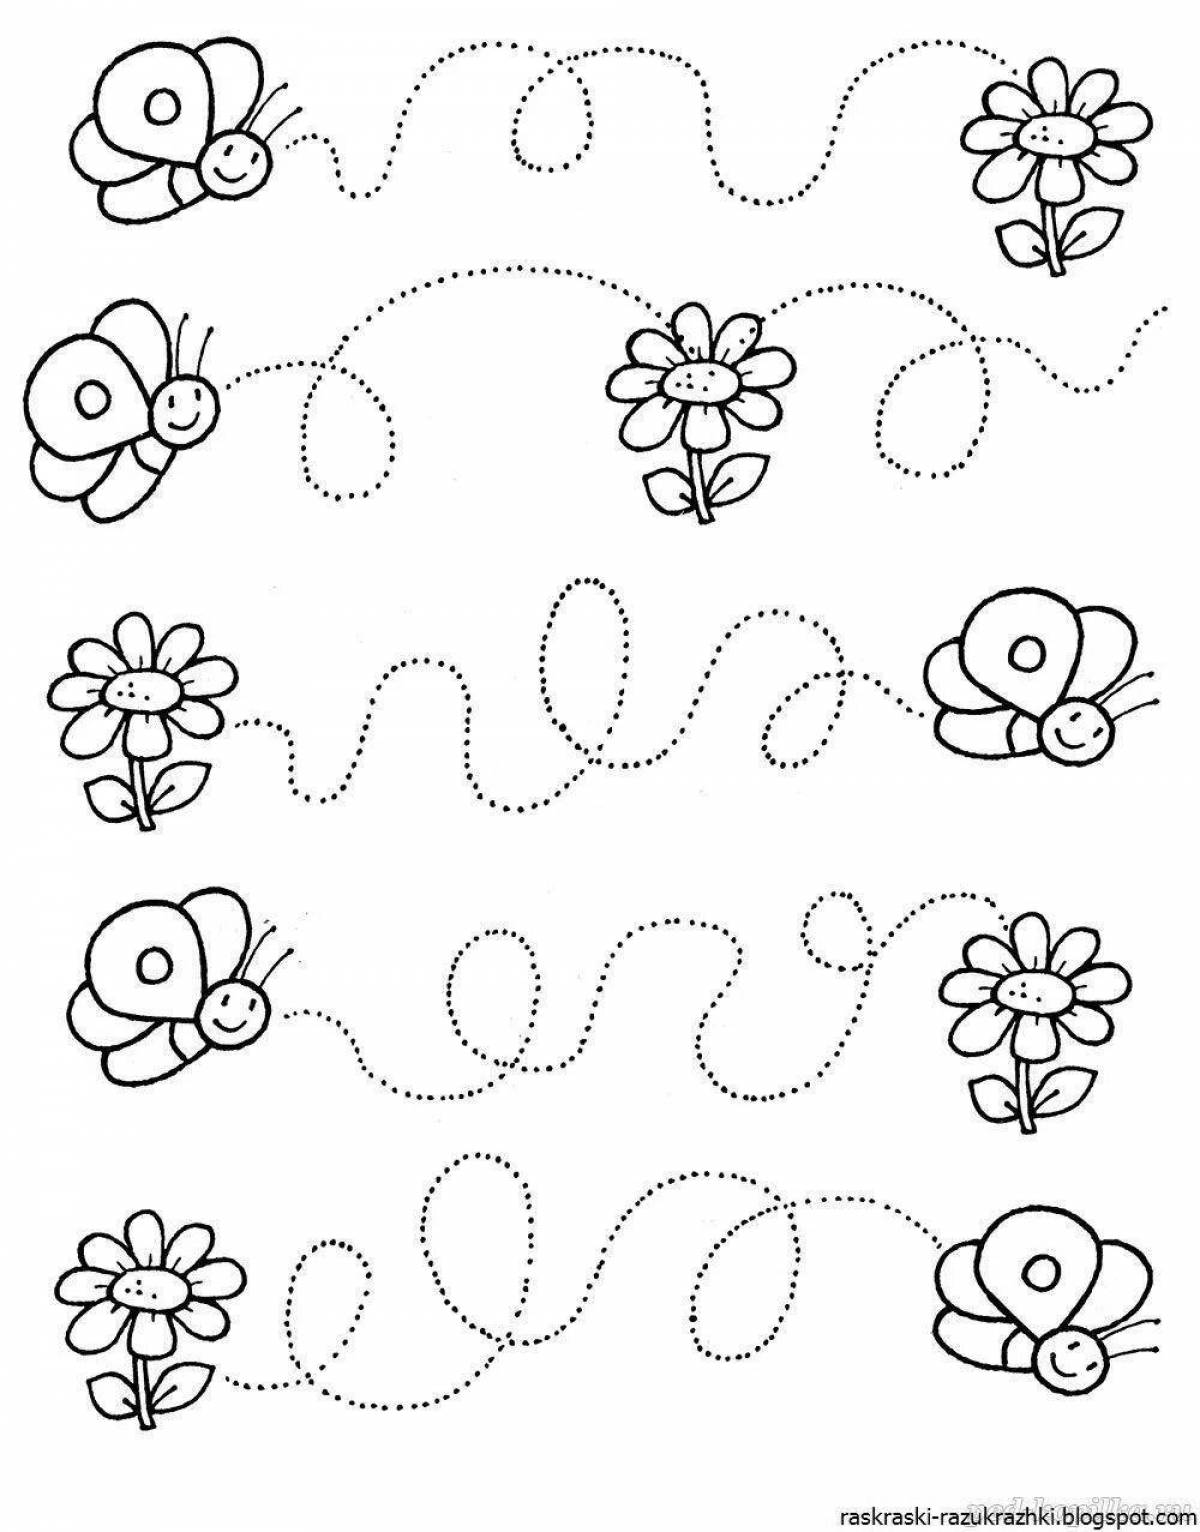 Fun coloring pages for 3-4 year olds